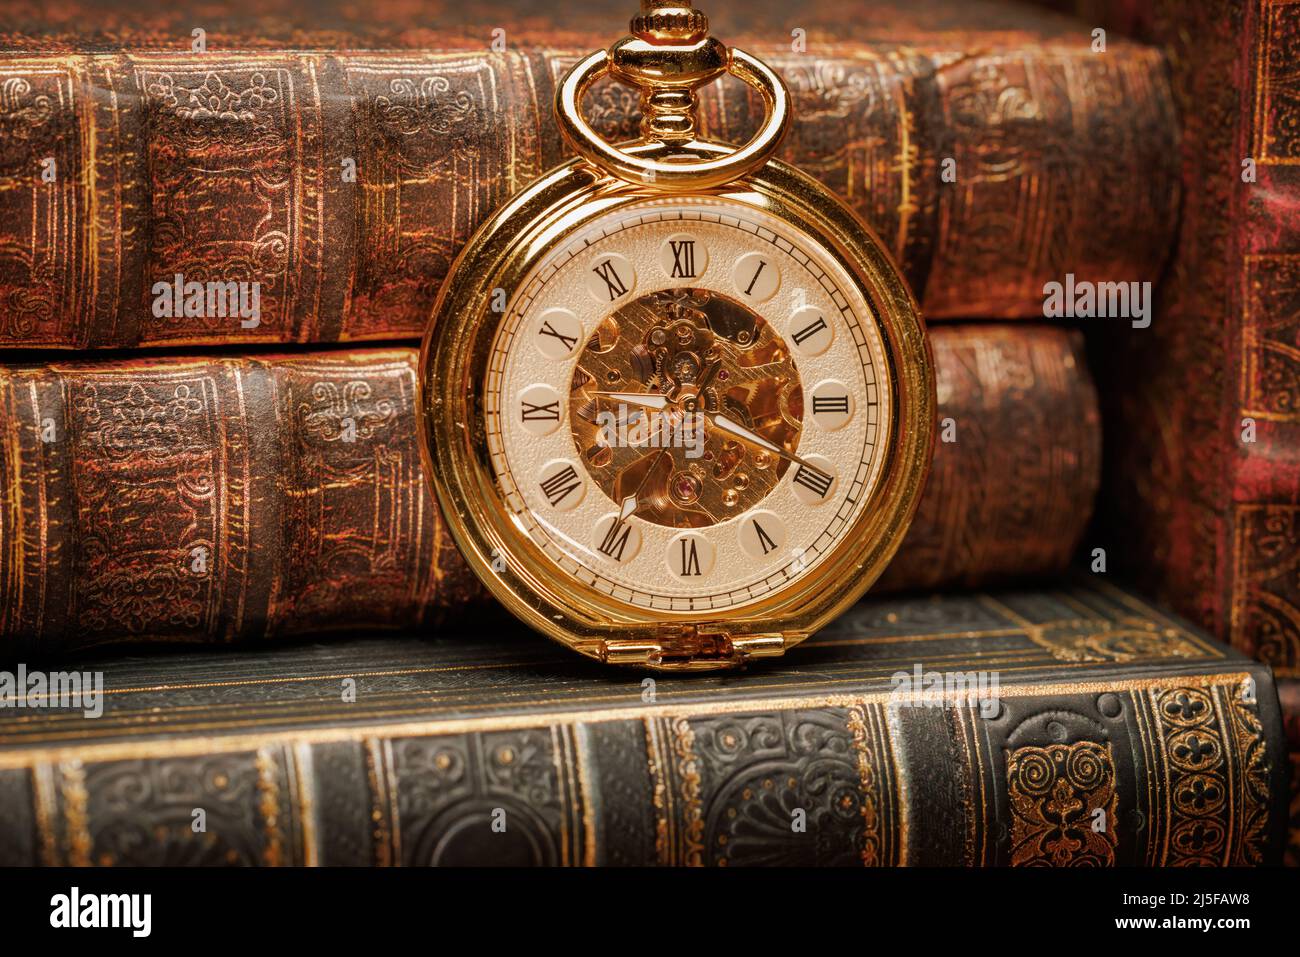 Vintage Antique pocket watch on the background of old books Stock Photo